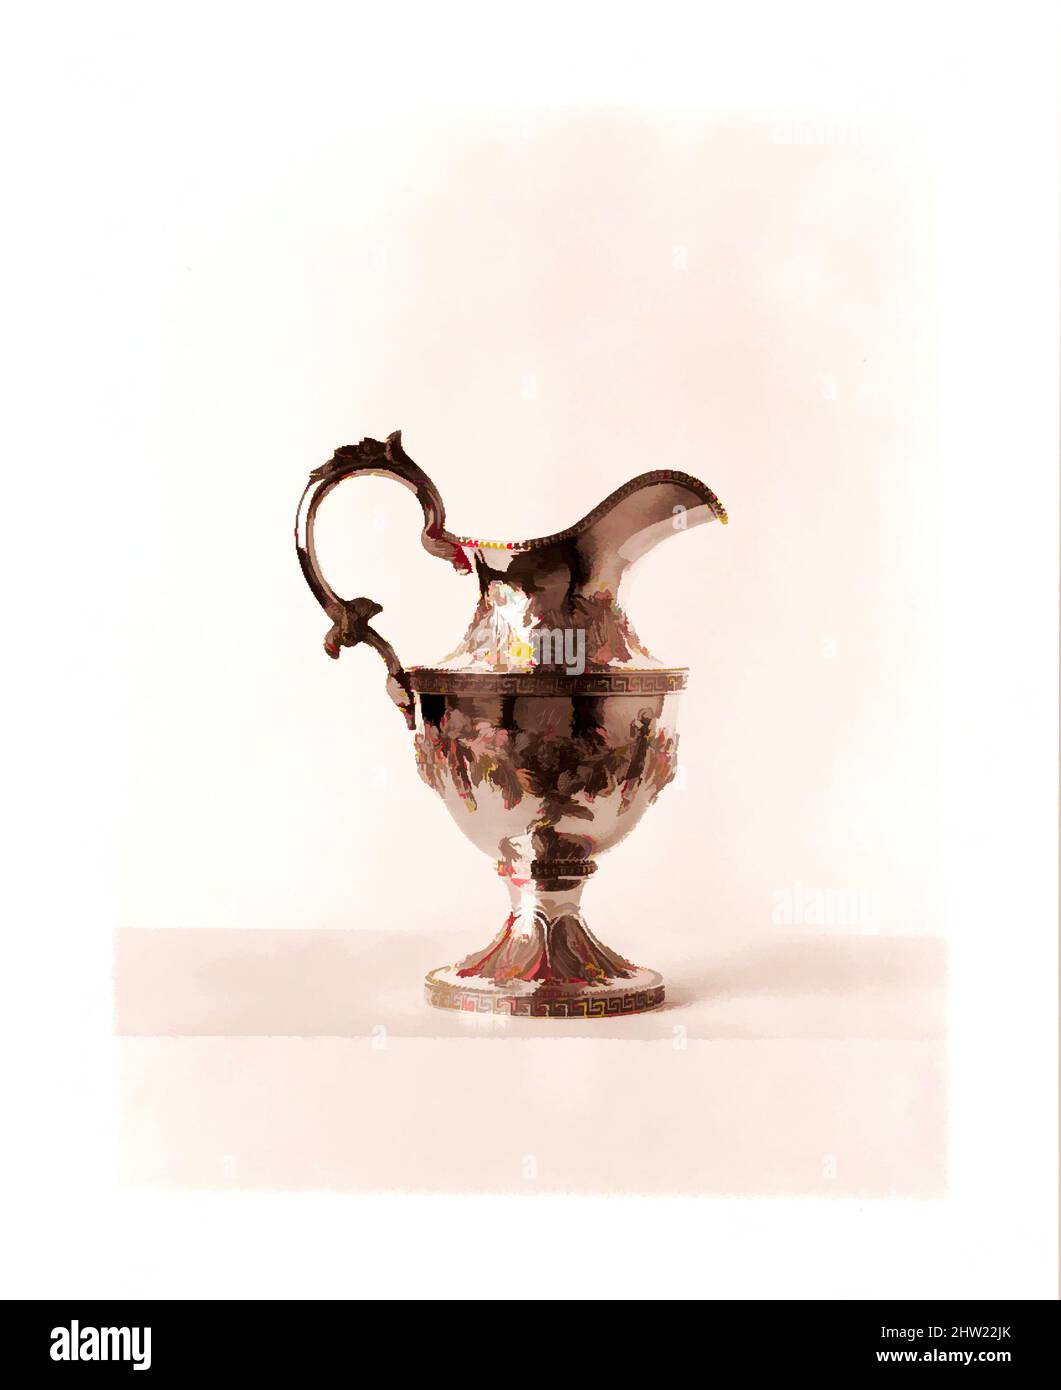 Art inspired by Creamer, 1835–45, Made in Philadelphia, Pennsylvania, United States, American, Silver, Overall: 8 11/16 x 6 9/16 x 4 5/16 in. (22.1 x 16.7 x 11 cm); 16 oz. 6 dwt. (506.8 g), Silver, Robert and William Wilson (active ca. 1825–ca6, Classic works modernized by Artotop with a splash of modernity. Shapes, color and value, eye-catching visual impact on art. Emotions through freedom of artworks in a contemporary way. A timeless message pursuing a wildly creative new direction. Artists turning to the digital medium and creating the Artotop NFT Stock Photo